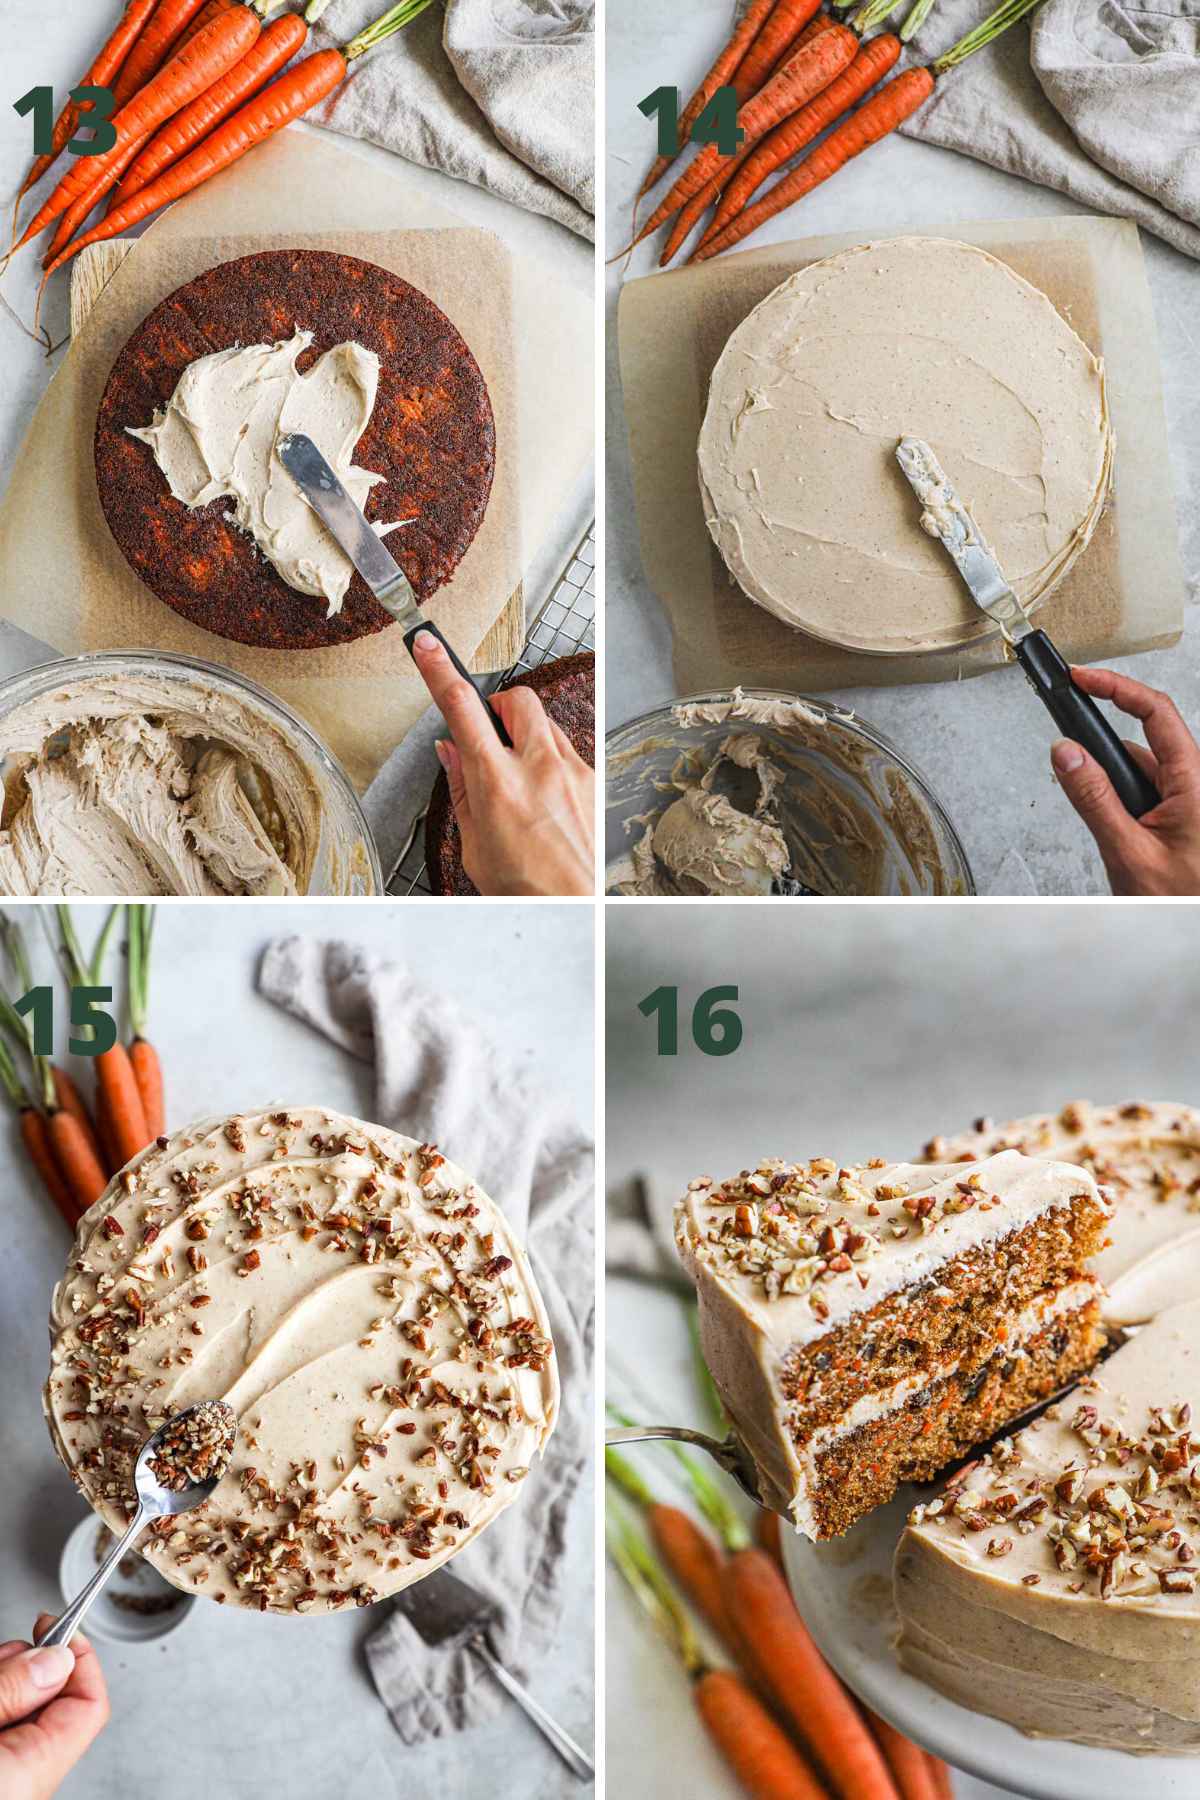 Steps to make carrot cake, spread chai cream cheese frosting on layers, sprinkle with toasted pecans, and serve.